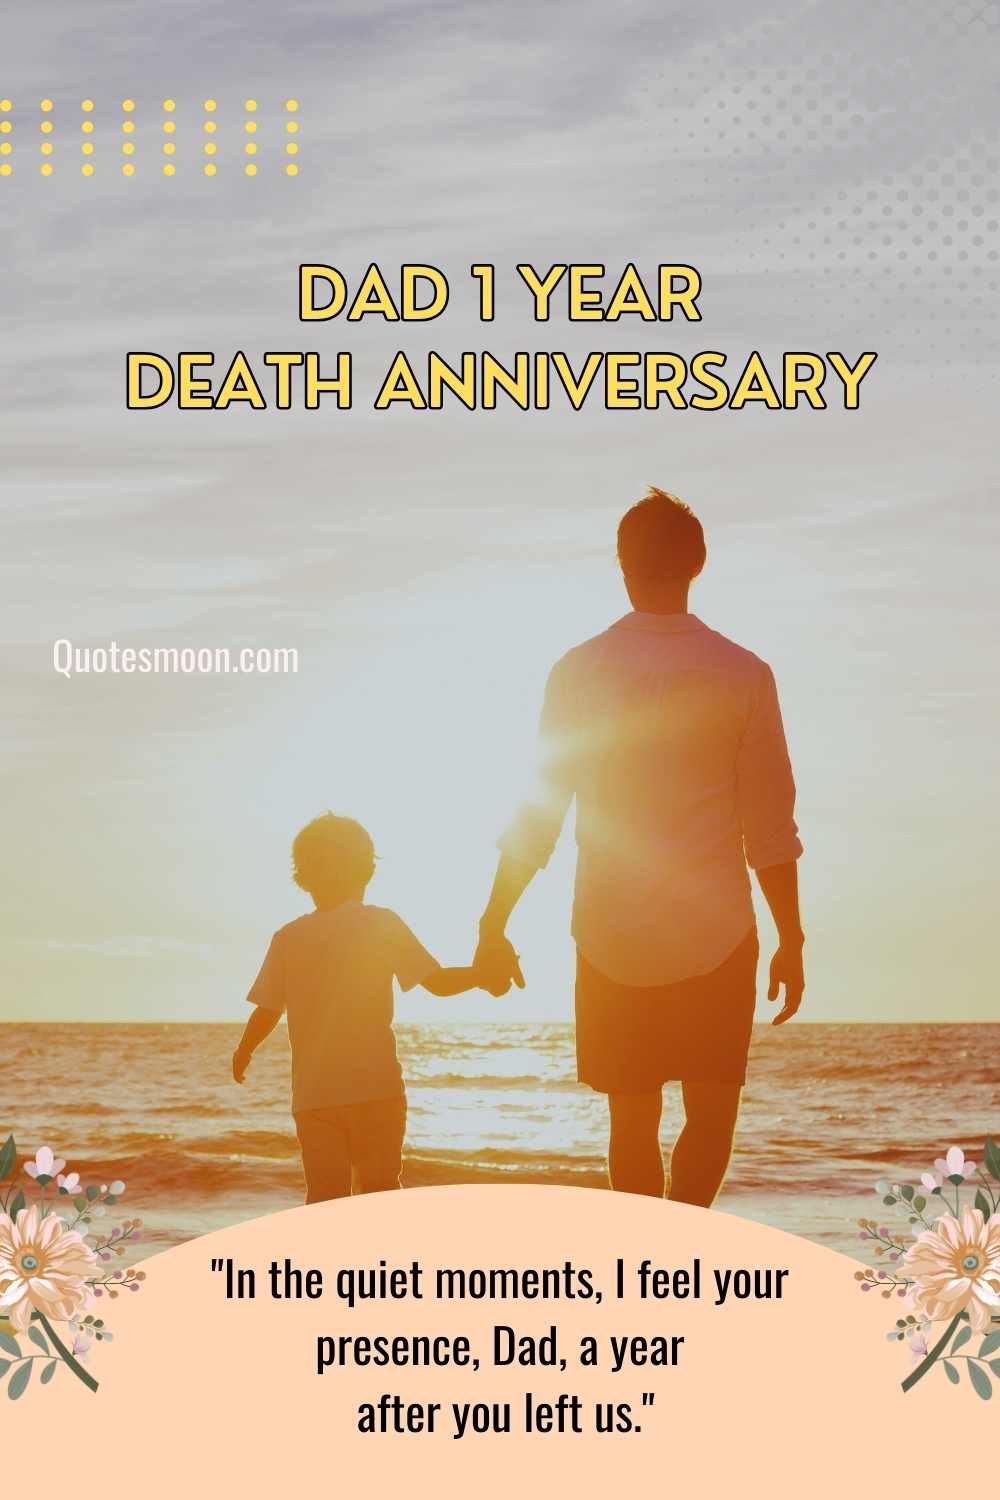 Remembering Dad On His 1 Year Death Anniversary